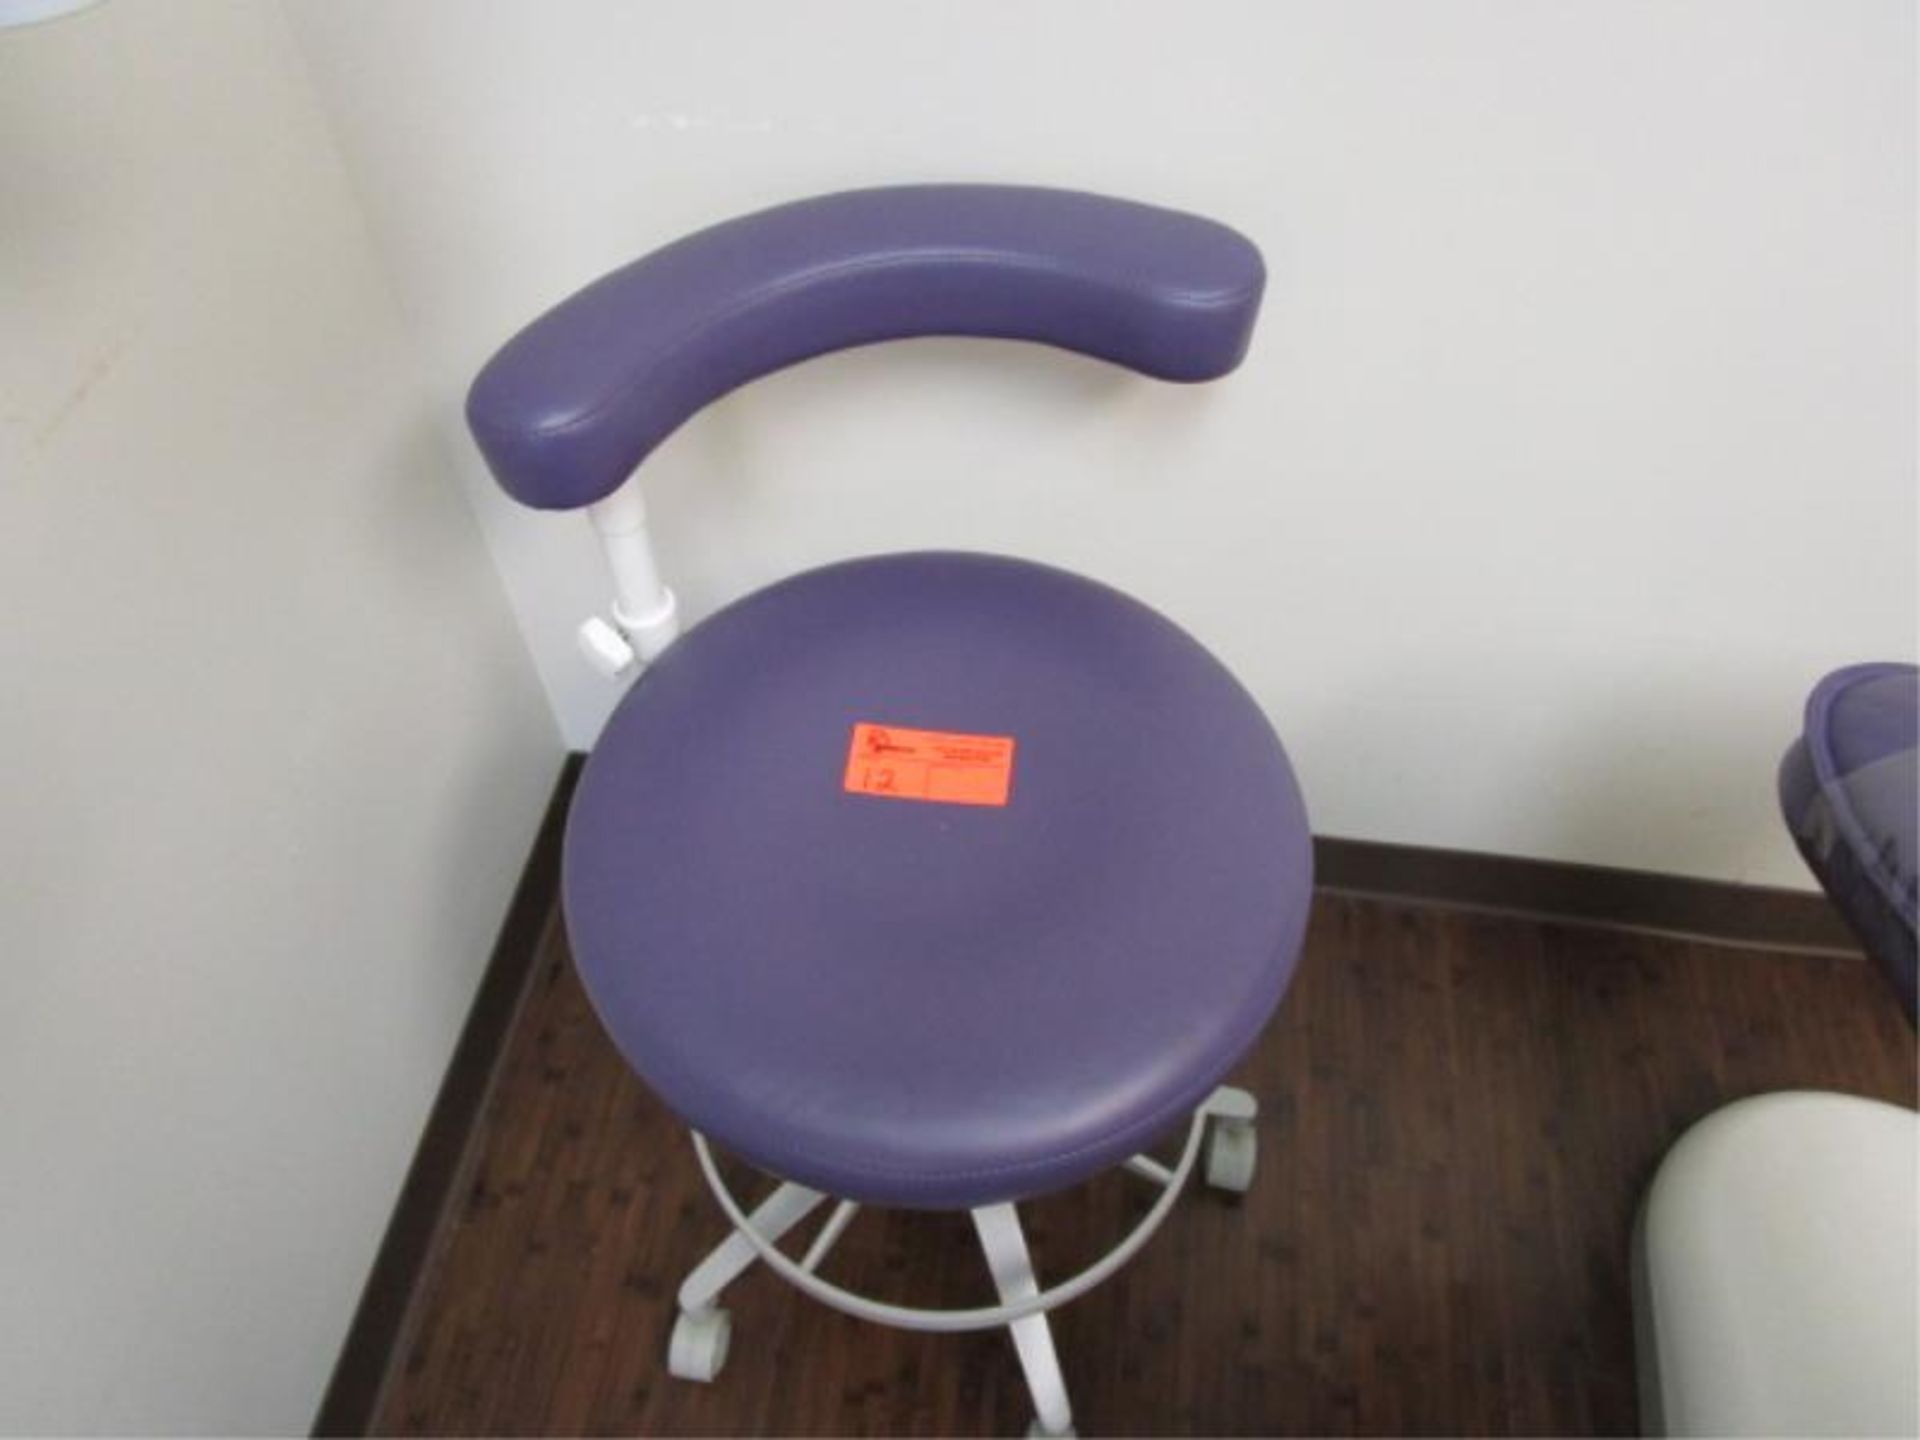 A-dec 1622 Dental Assistant's Stool, SN: 13C77008 - Image 2 of 4